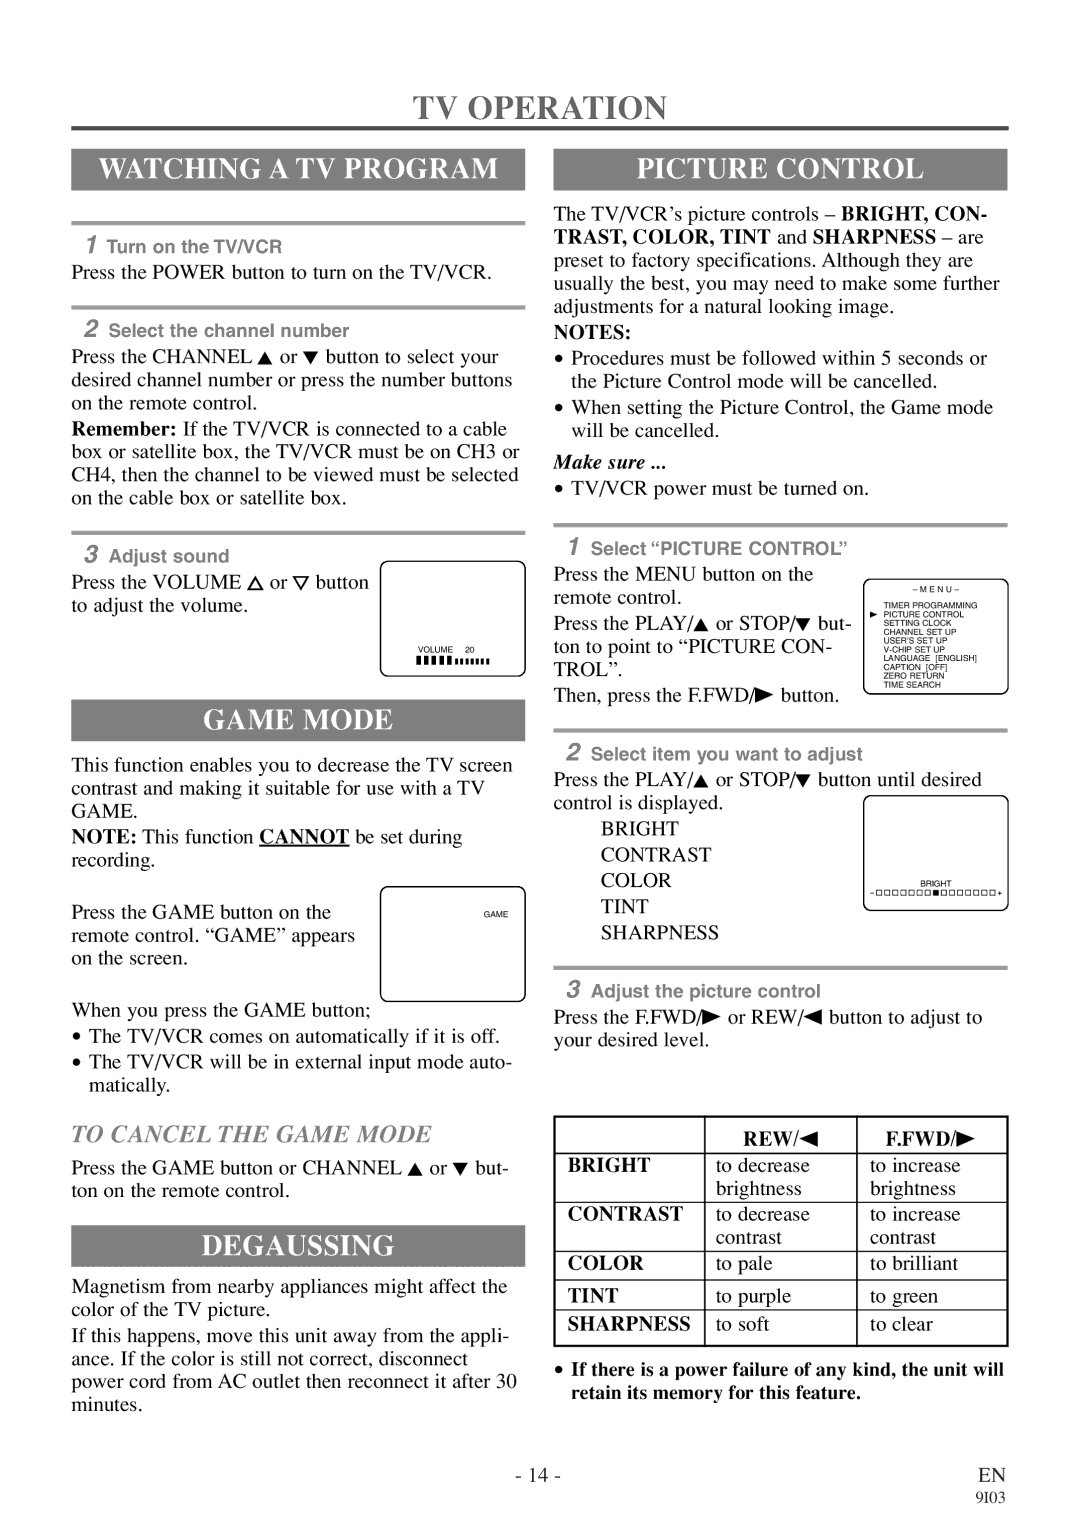 Symphonic WF319E owner manual TV Operation, Watching a TV Program, Picture Control, Game Mode, Degaussing 